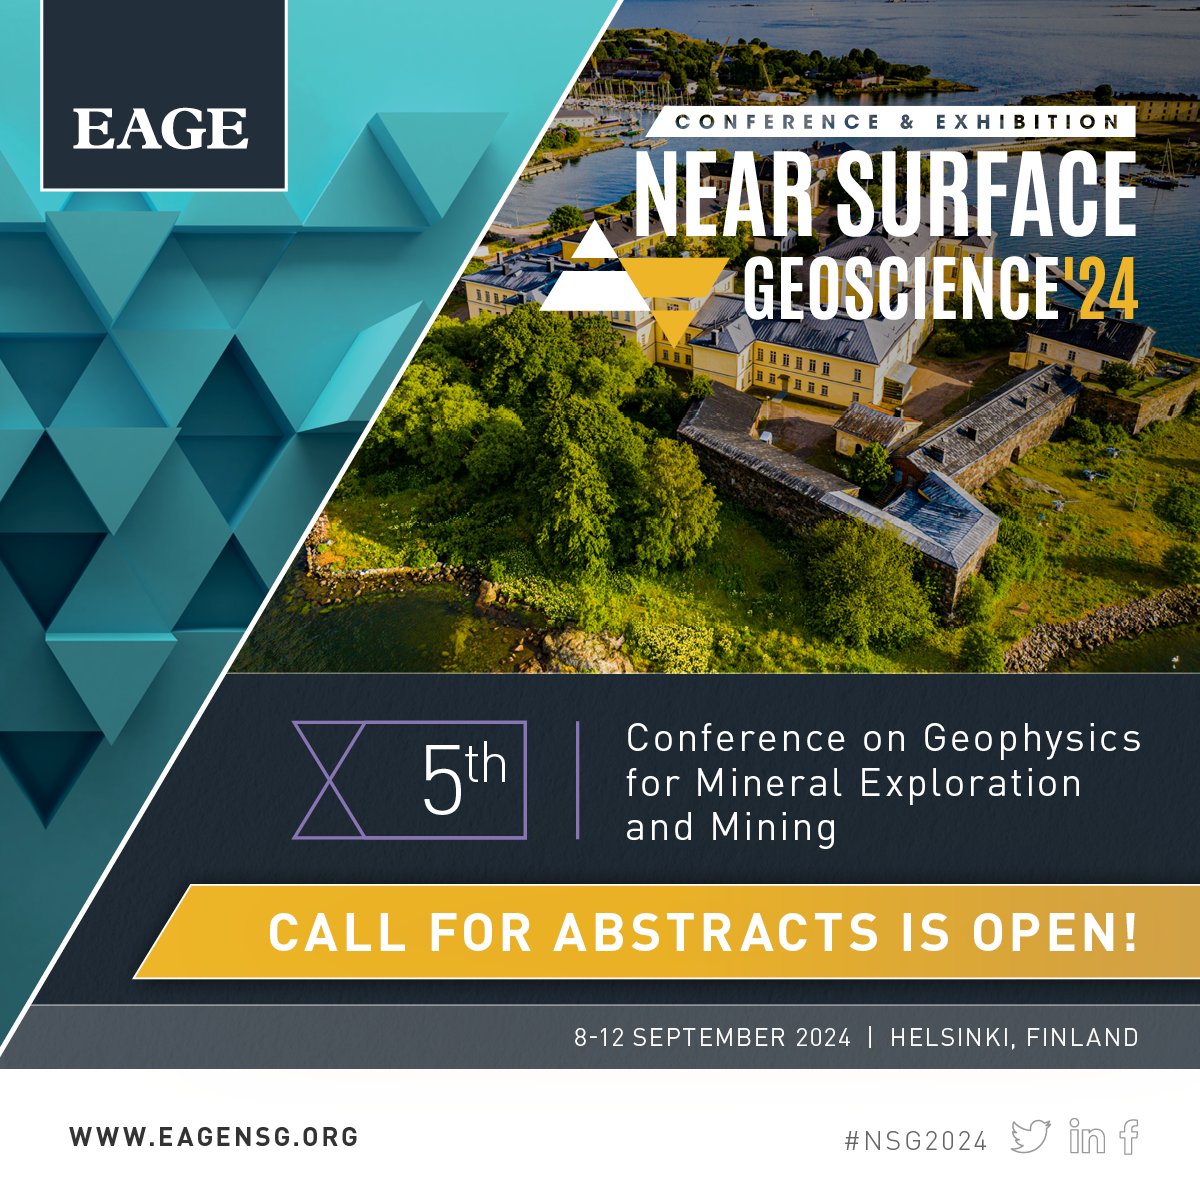 Deadline Alert: April 25! Submit your abstract for the 5th Conference on Geophysics for Mineral Exploration & Mining at #NSG2024 in Helsinki, Sept 8-12. Don't miss out on leading sustainable mining innovation. Submit now ➡ ow.ly/J62050QBENp #Geophysics #Mining #Helsinki